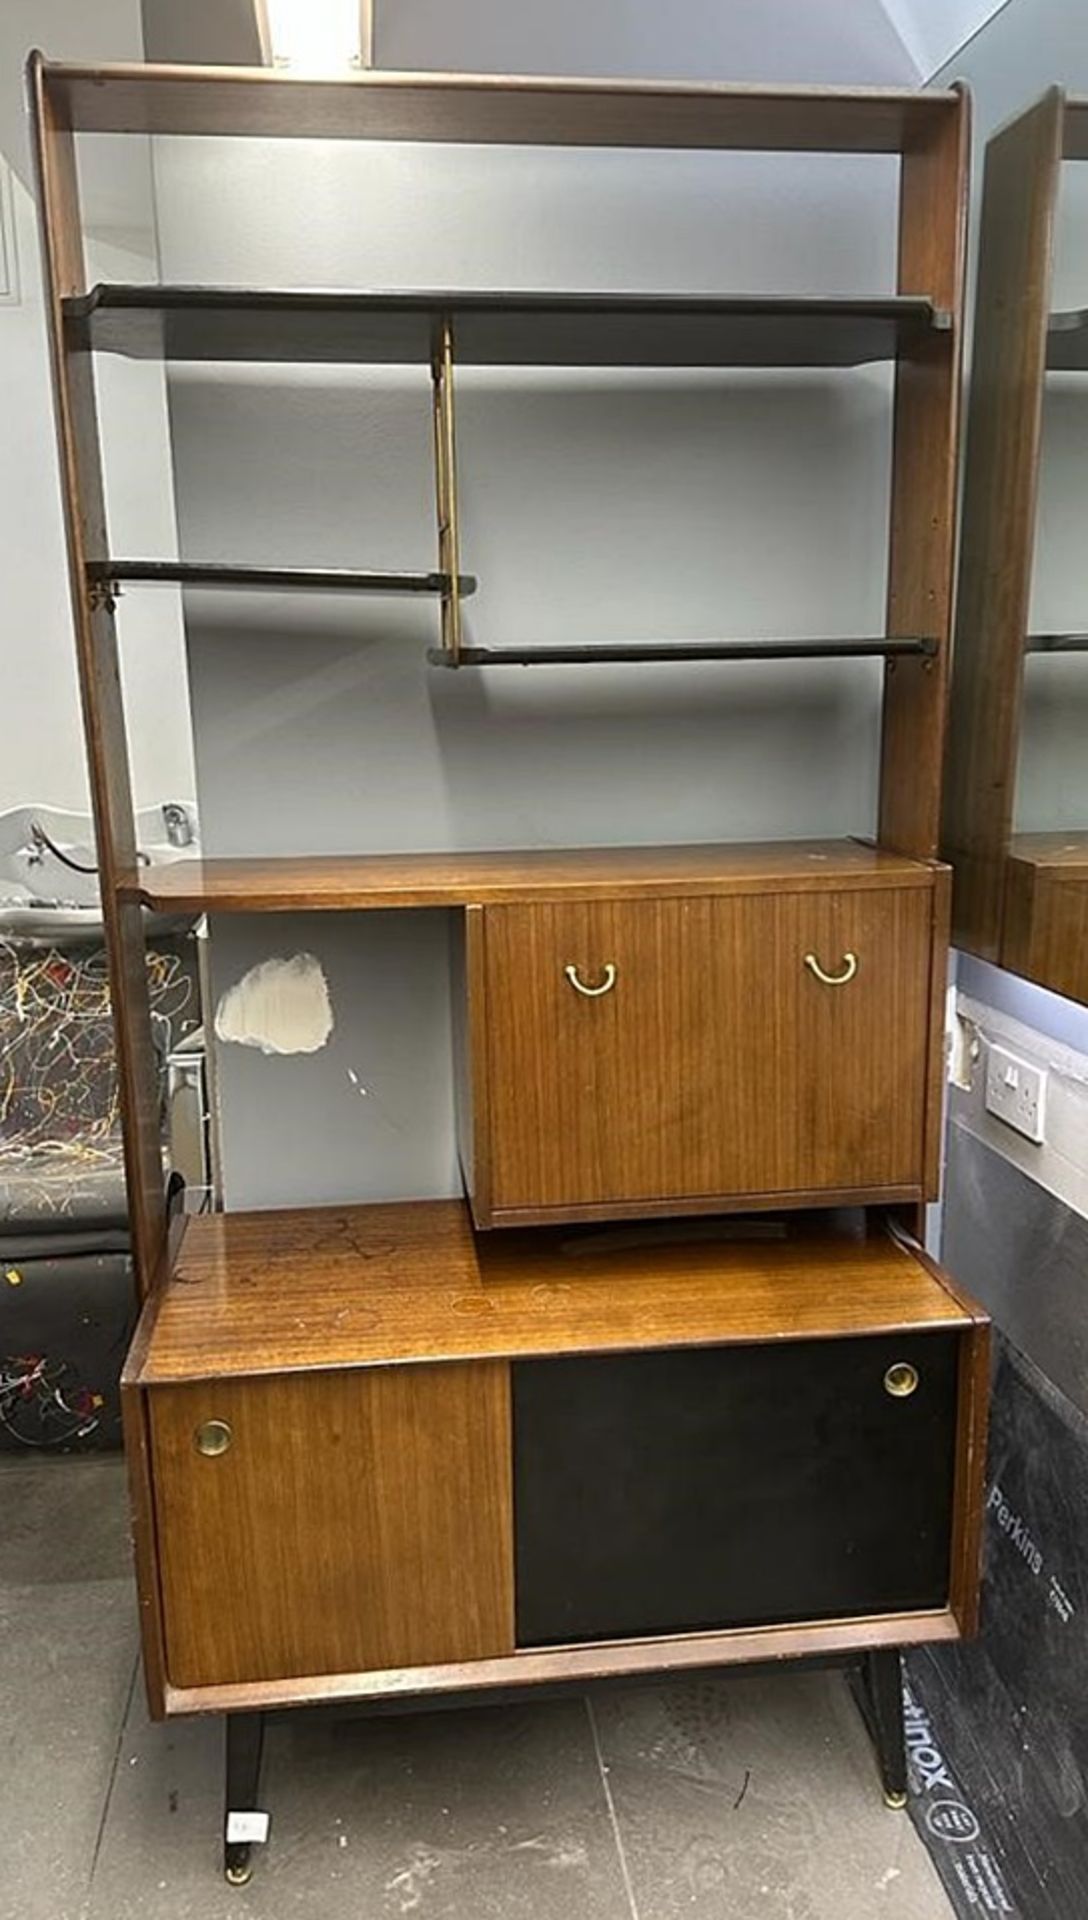 An Original 1960s G-plan Room Divider With Writing Desk - From An Award-winning Chelsea Hair Salon - - Image 2 of 8